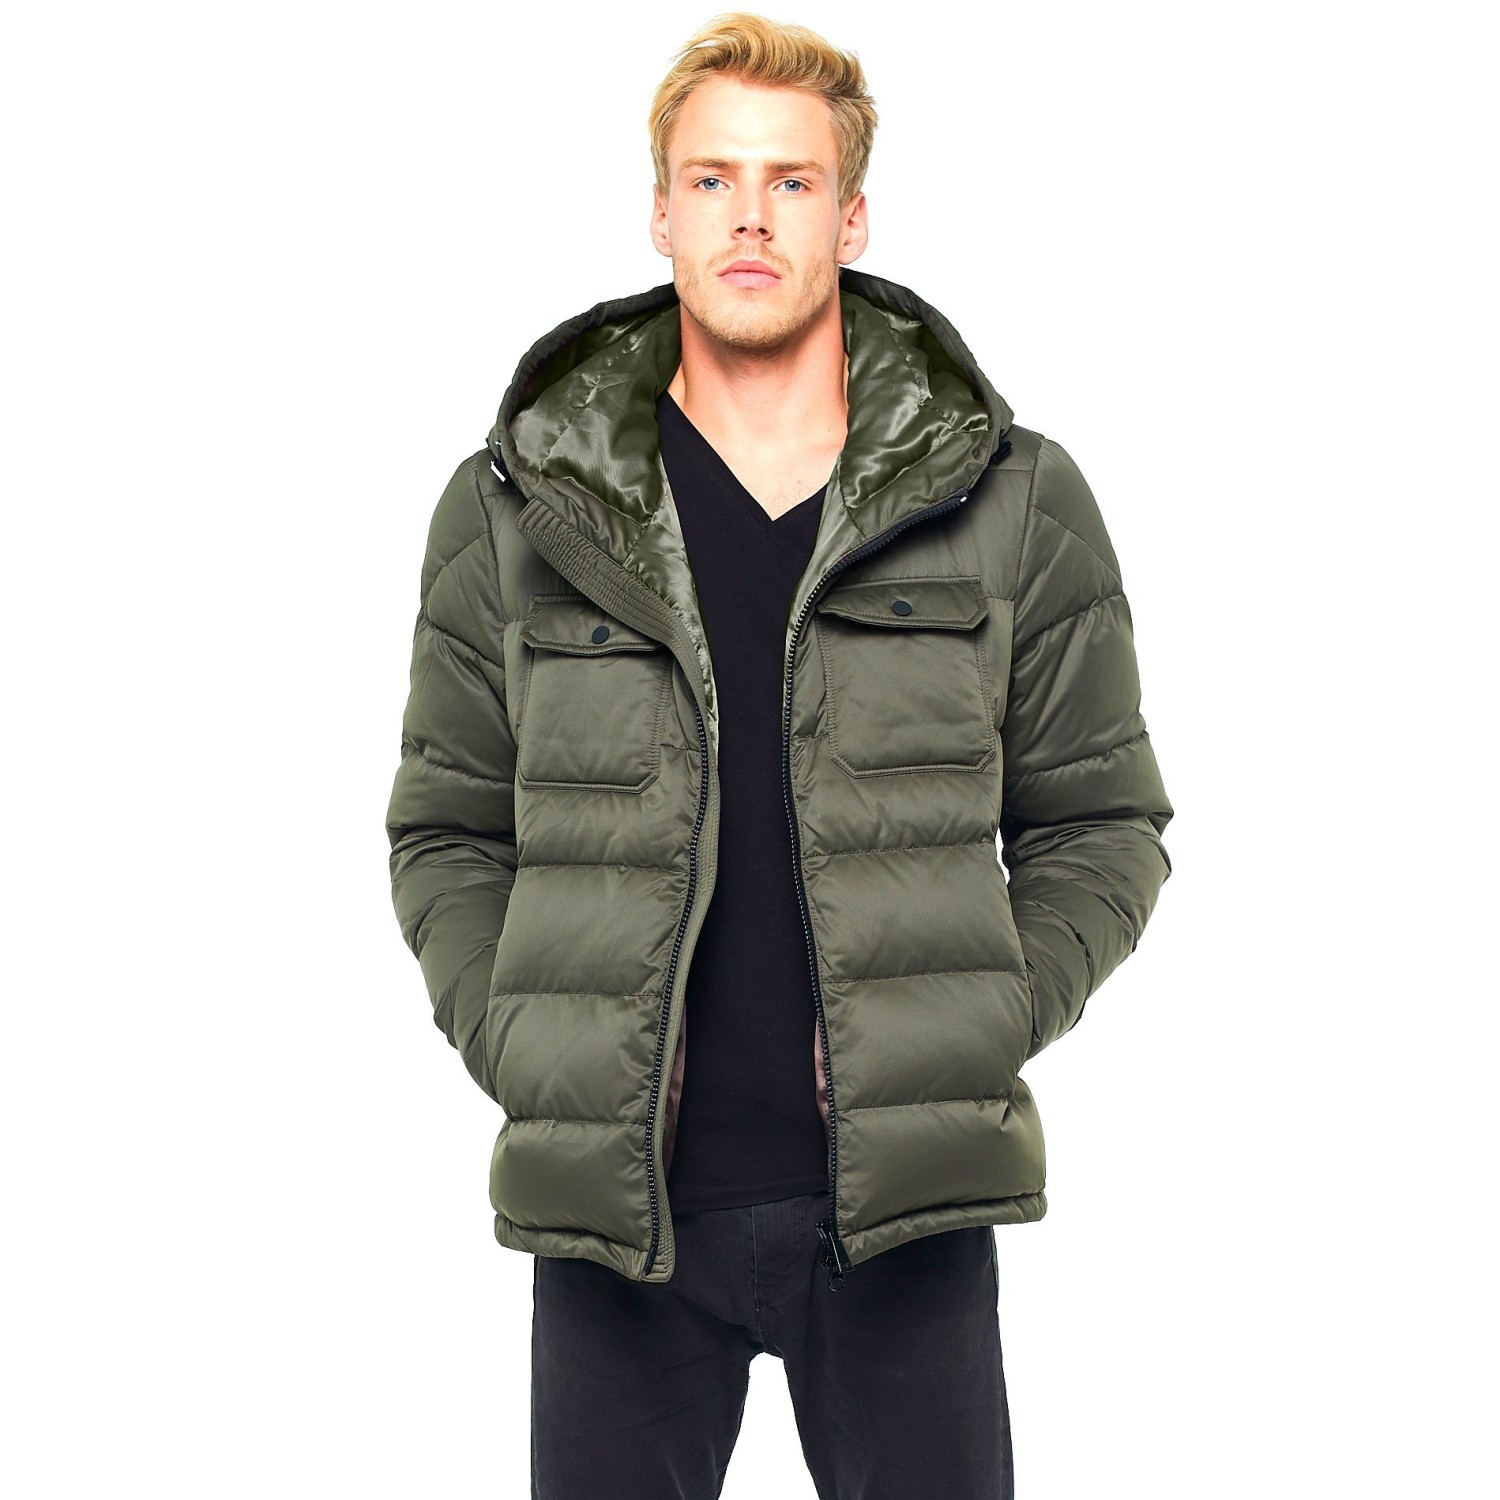 Alalaso Mens Winter Warm Jacket Fleece Coat with Hood Outwear Casual Pure Color Hooded Warm Cotton Clothing Coat 